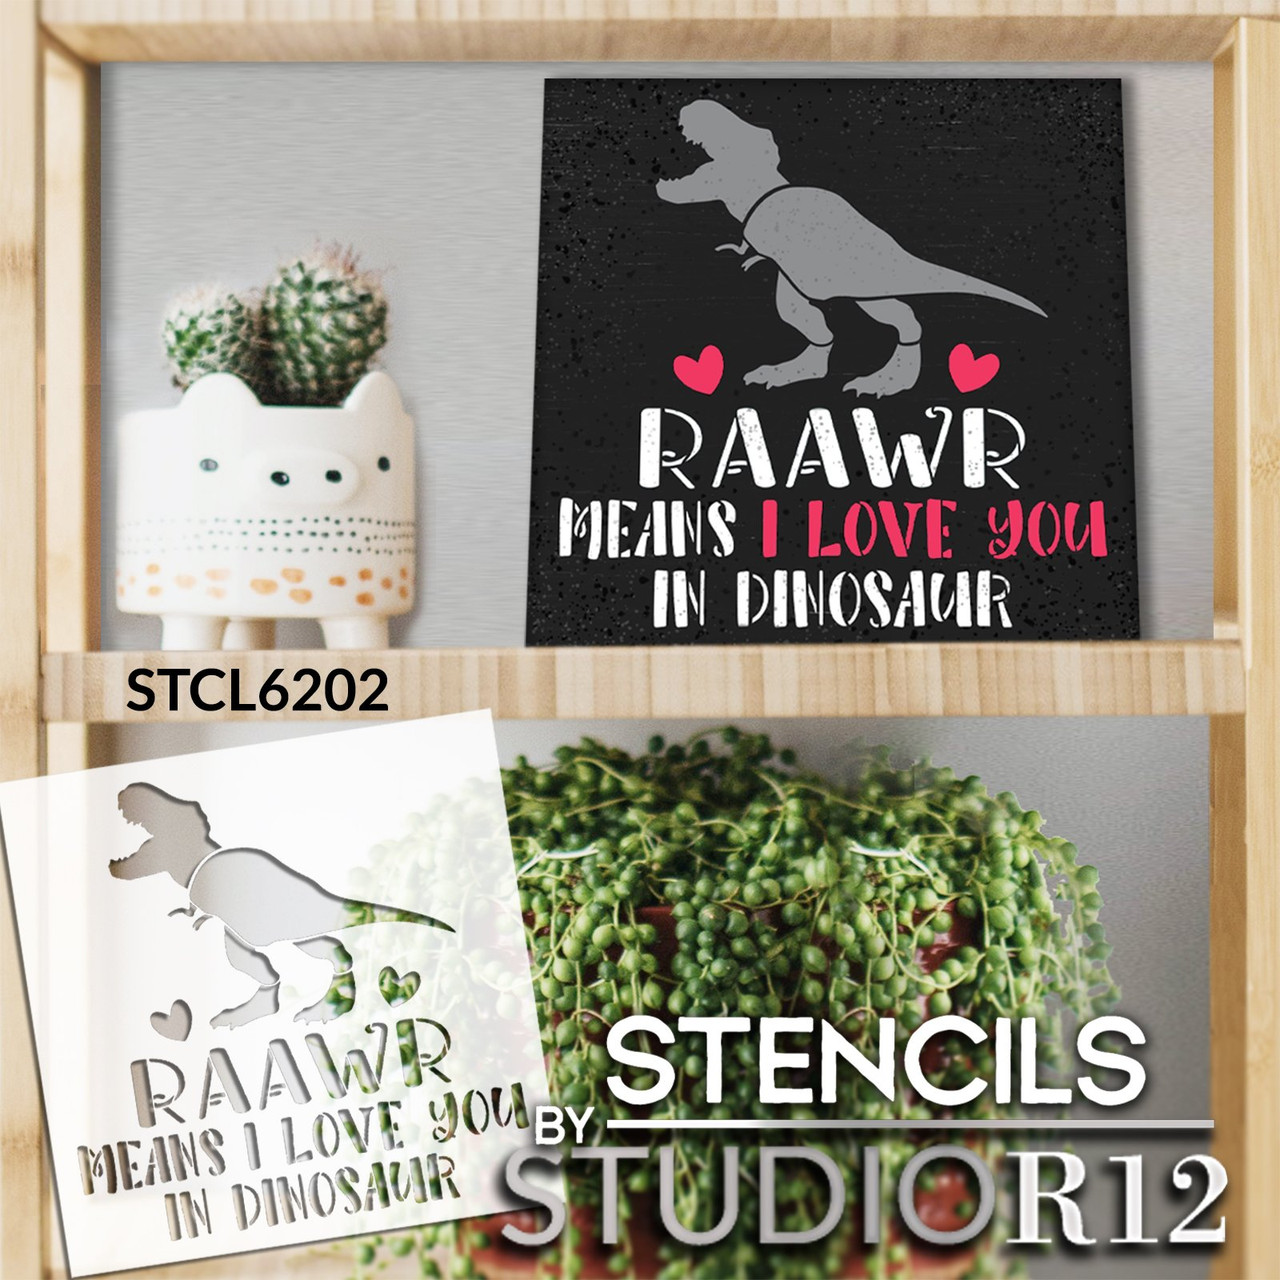 Rawr is I Love You in Dinosaur Stencil by StudioR12 | Craft DIY Valentines' Home Decor | Paint Love Wood Sign | Reusable Mylar Template | Select Size